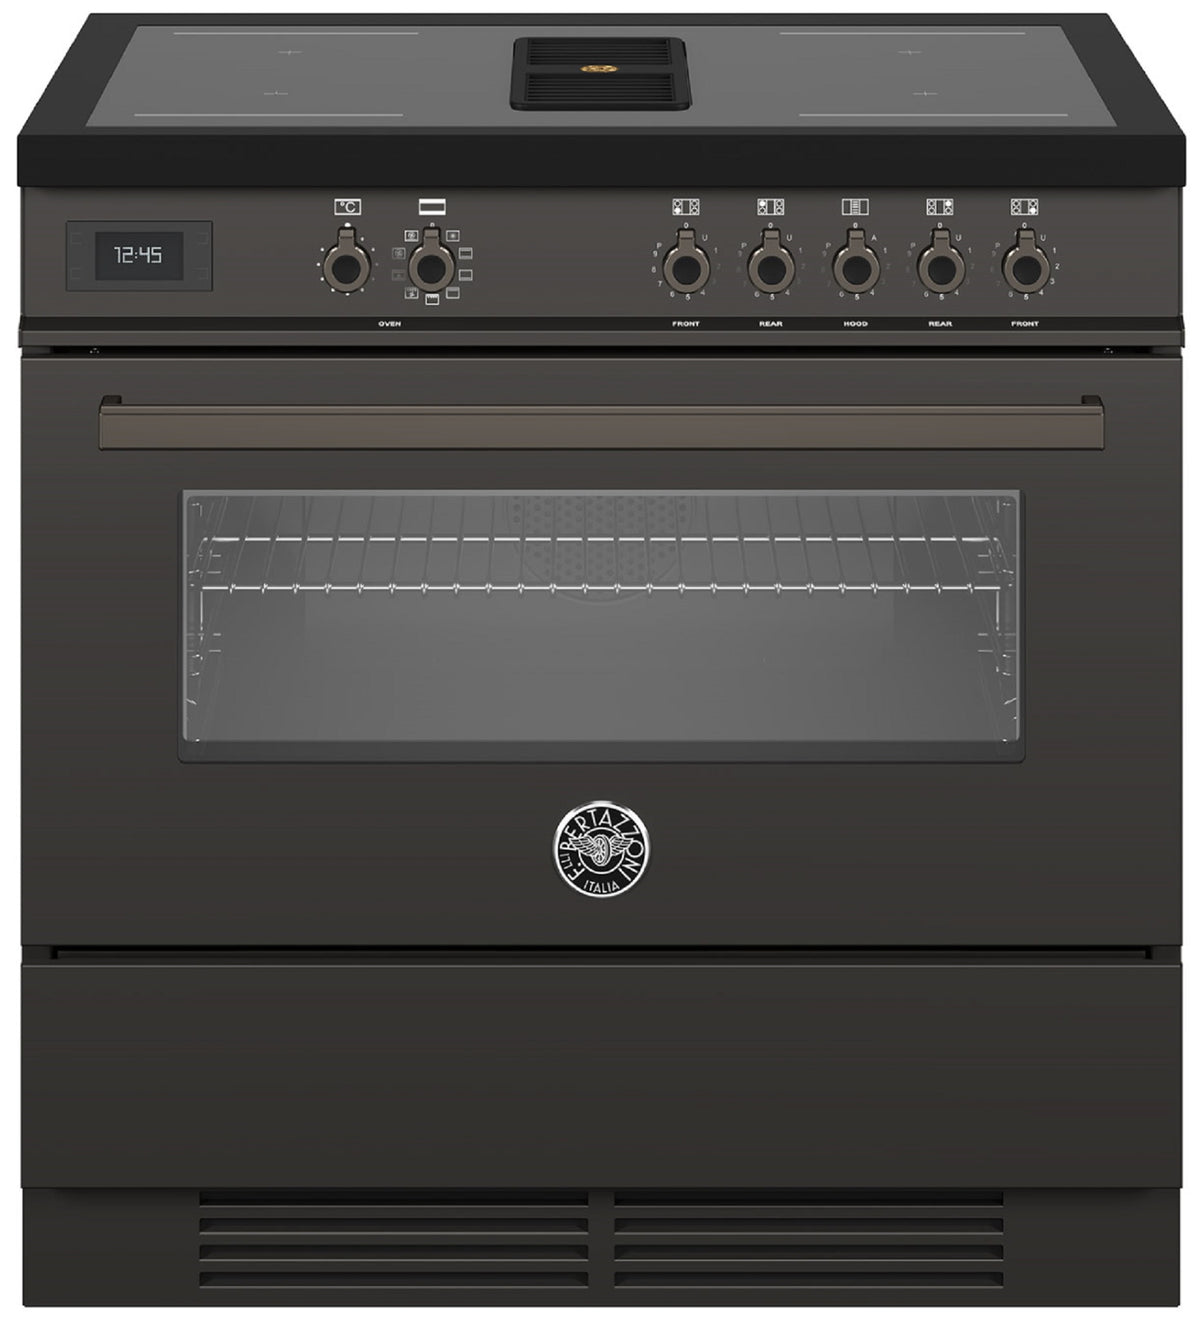 BERTAZZONI PROCH94I1ECAT 90cm Electric Oven 5 Zone Induction Hob with in-built Extractor Range Cooker in Carbonio